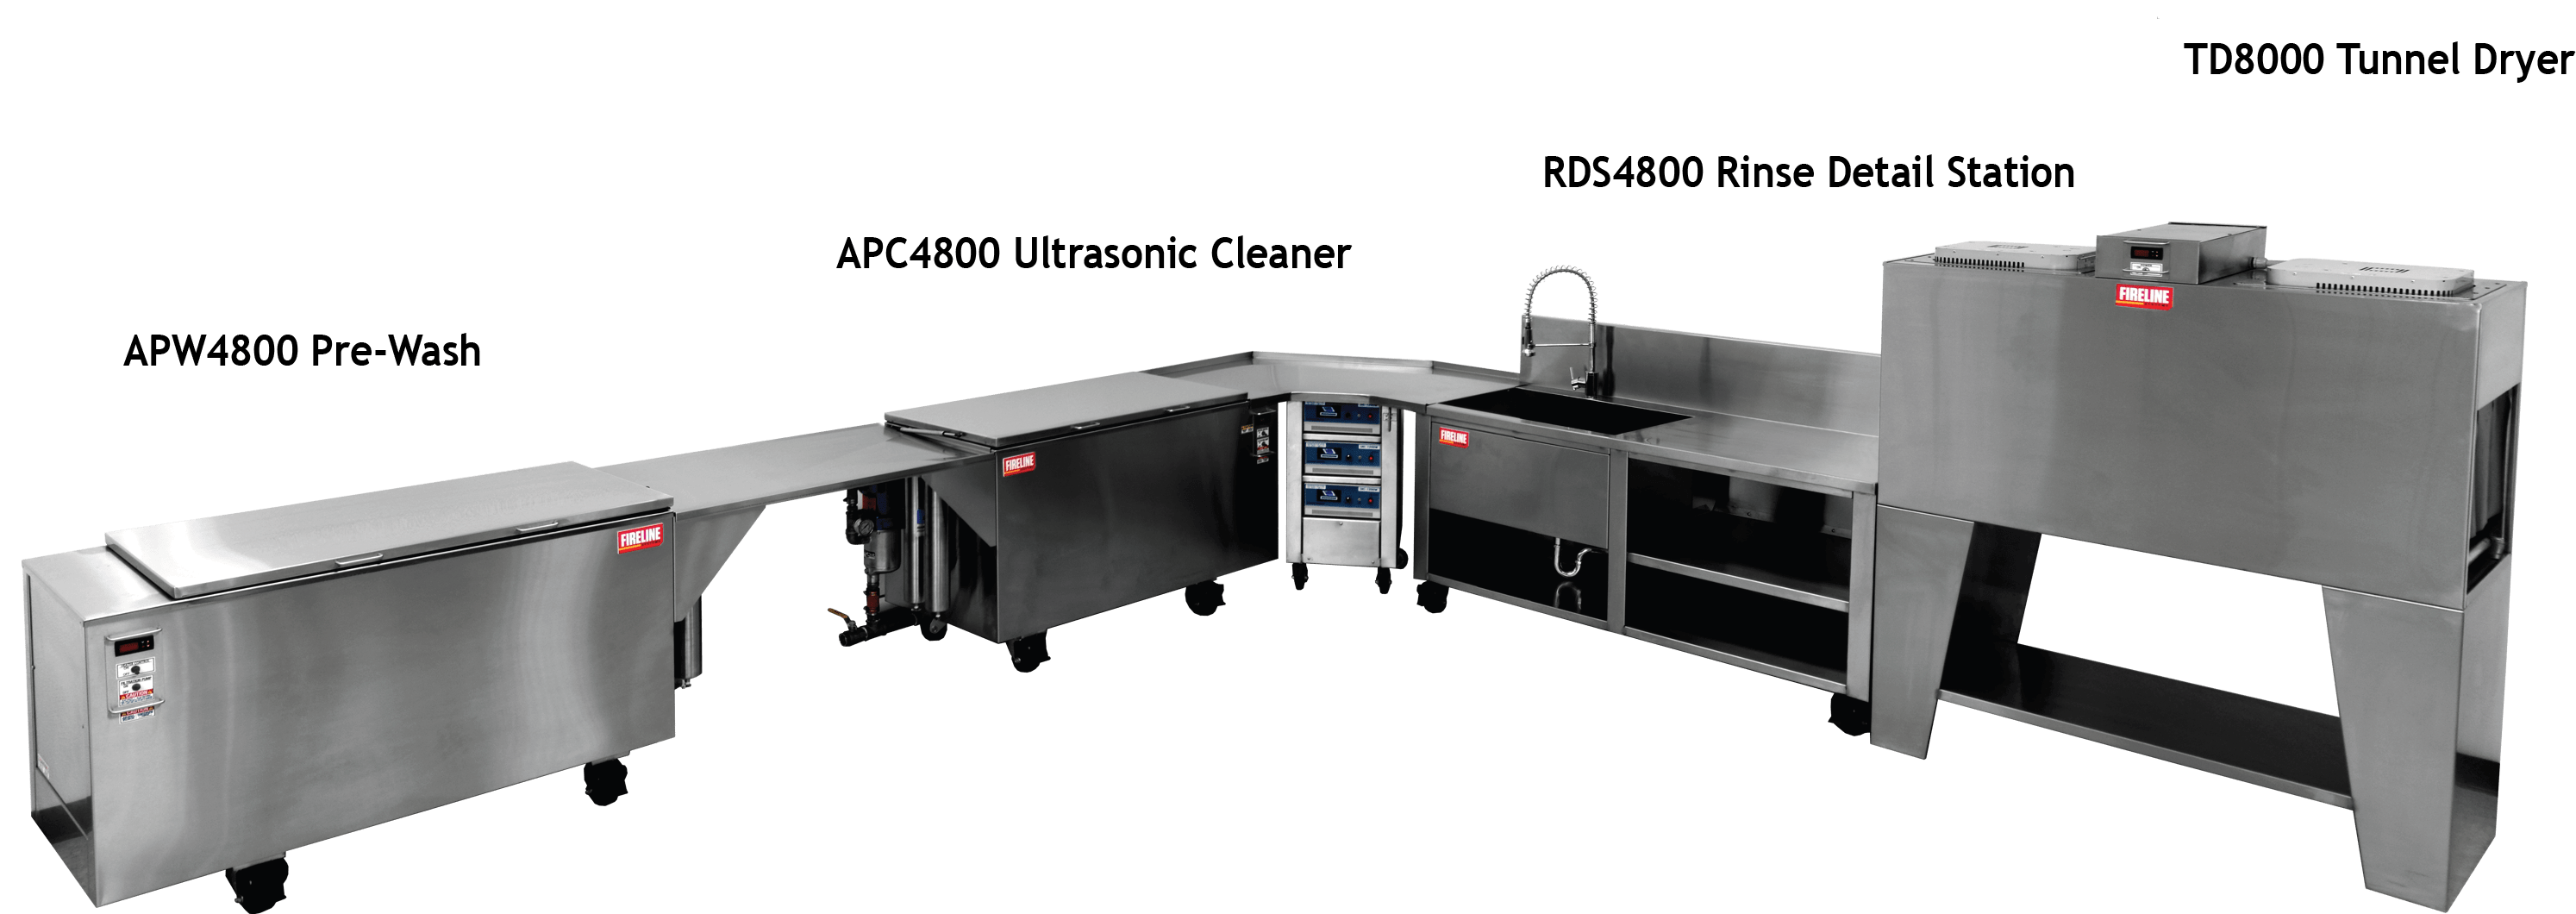 Fireline™ Systems Series I, Ultrasonic Cleaning Products, Precision  Cleaning Equipment, Ultrasonics International